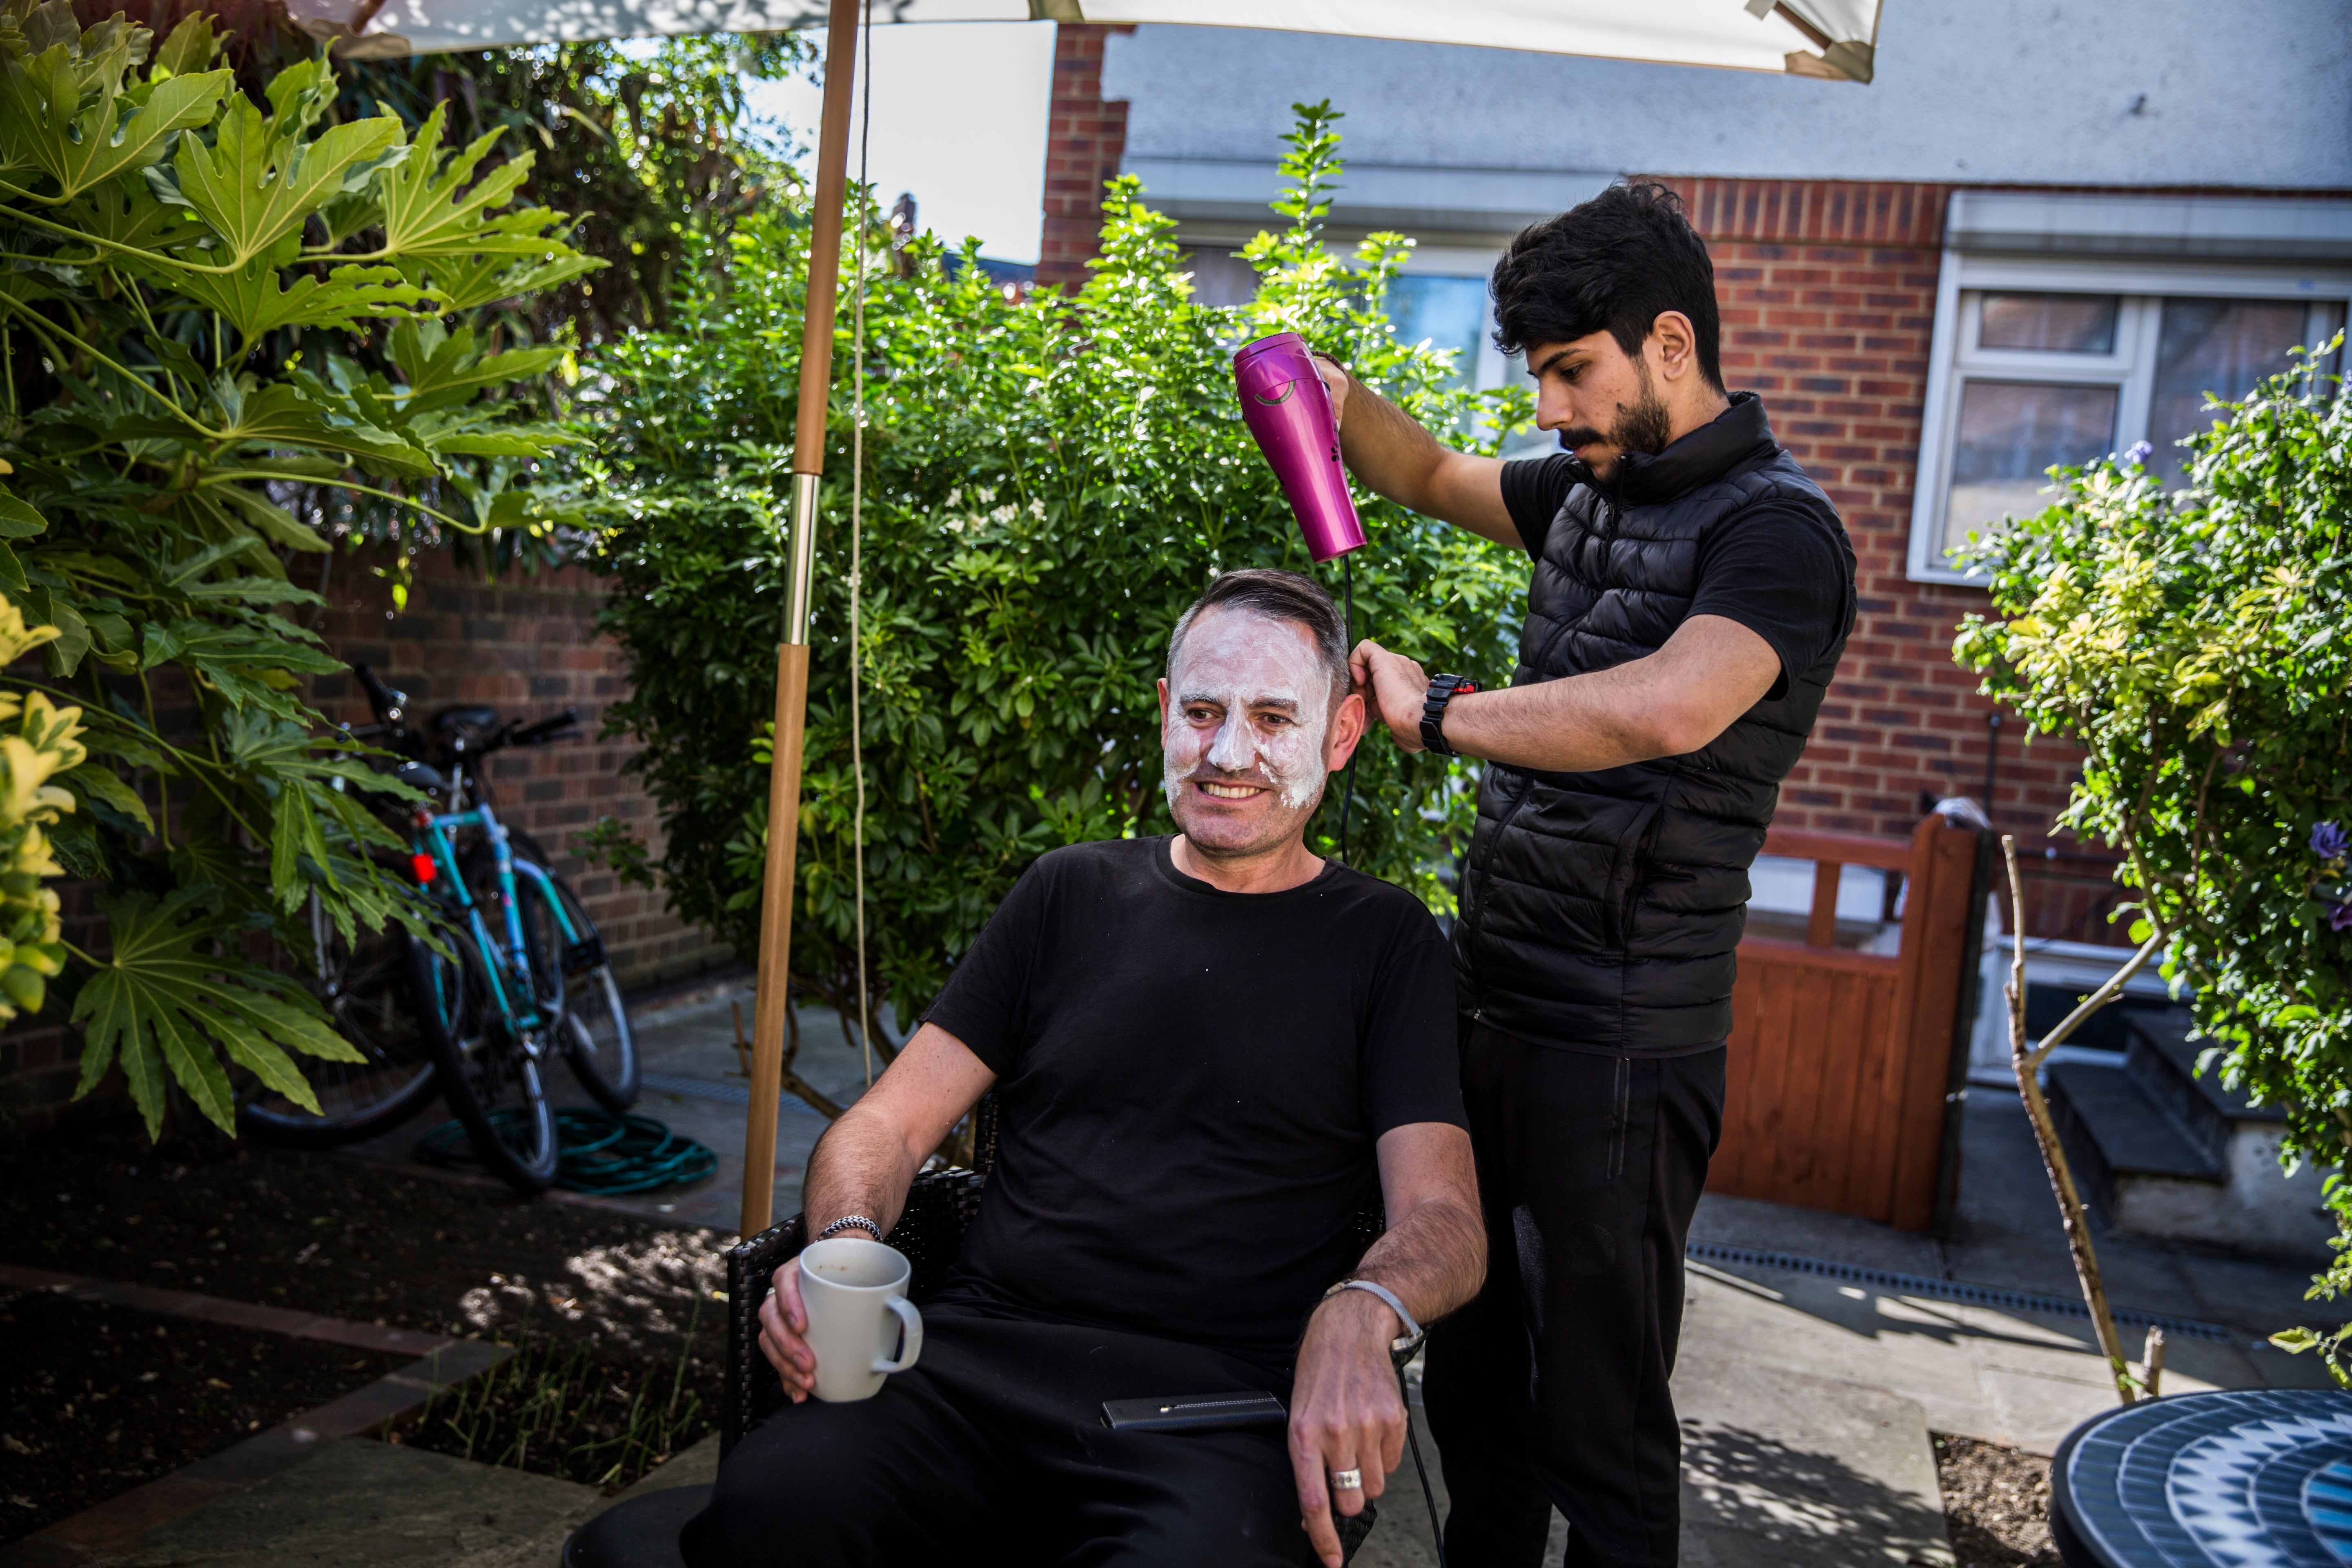 Syrian refugee Lutfi Al-Shaabin, who worked as a barber in Jordan where his family lived as refugees, cuts Tim Finch's hair at the Al-Shaabin home in south London